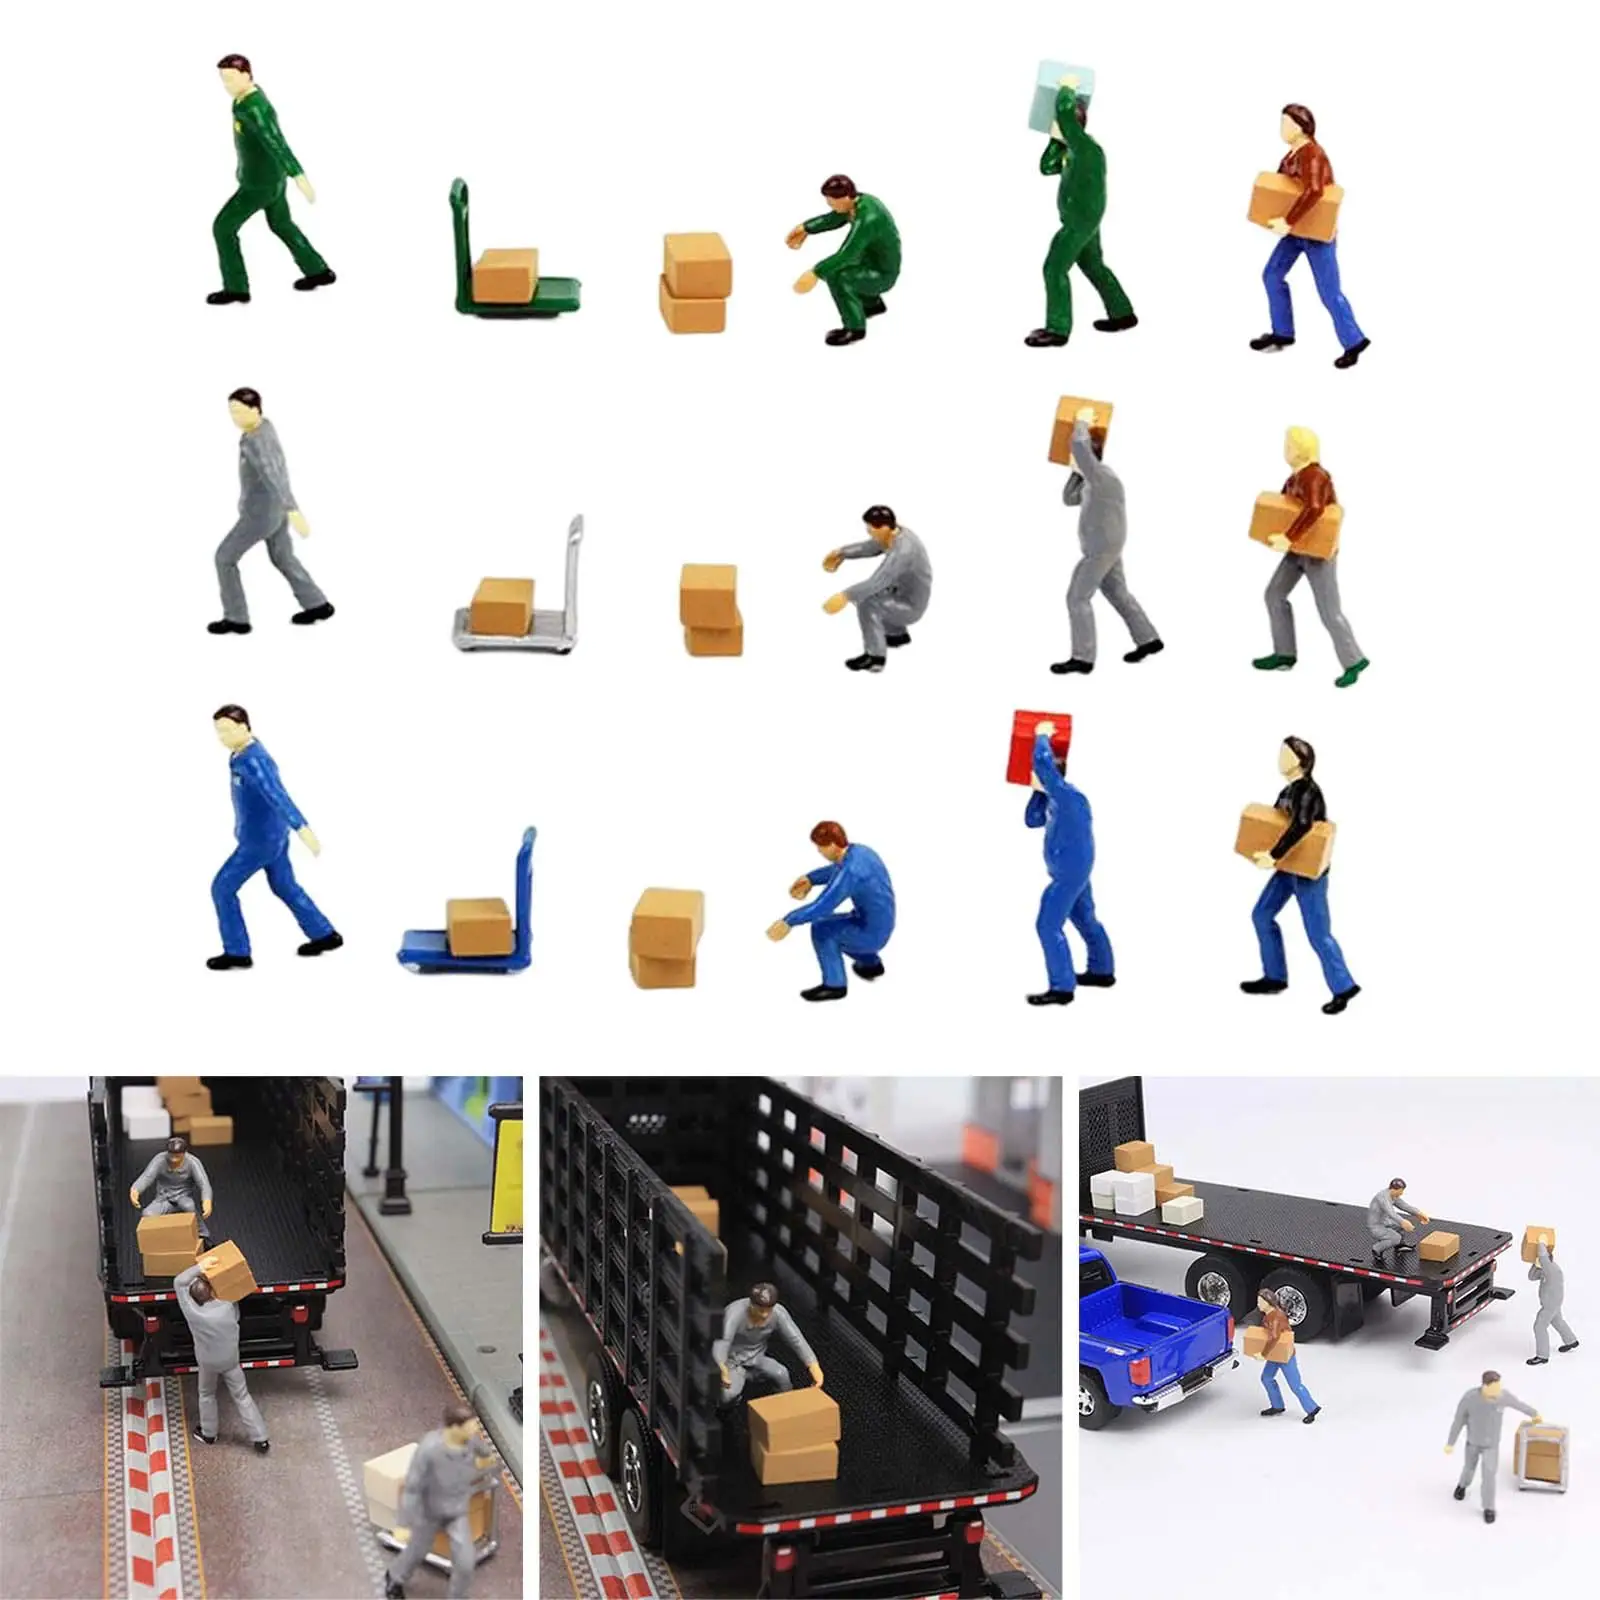 Miniature Model People Figurines Assorted Poses Resin Accessories Realistic Delicate Painted Worker Figurines 1/64 for Street